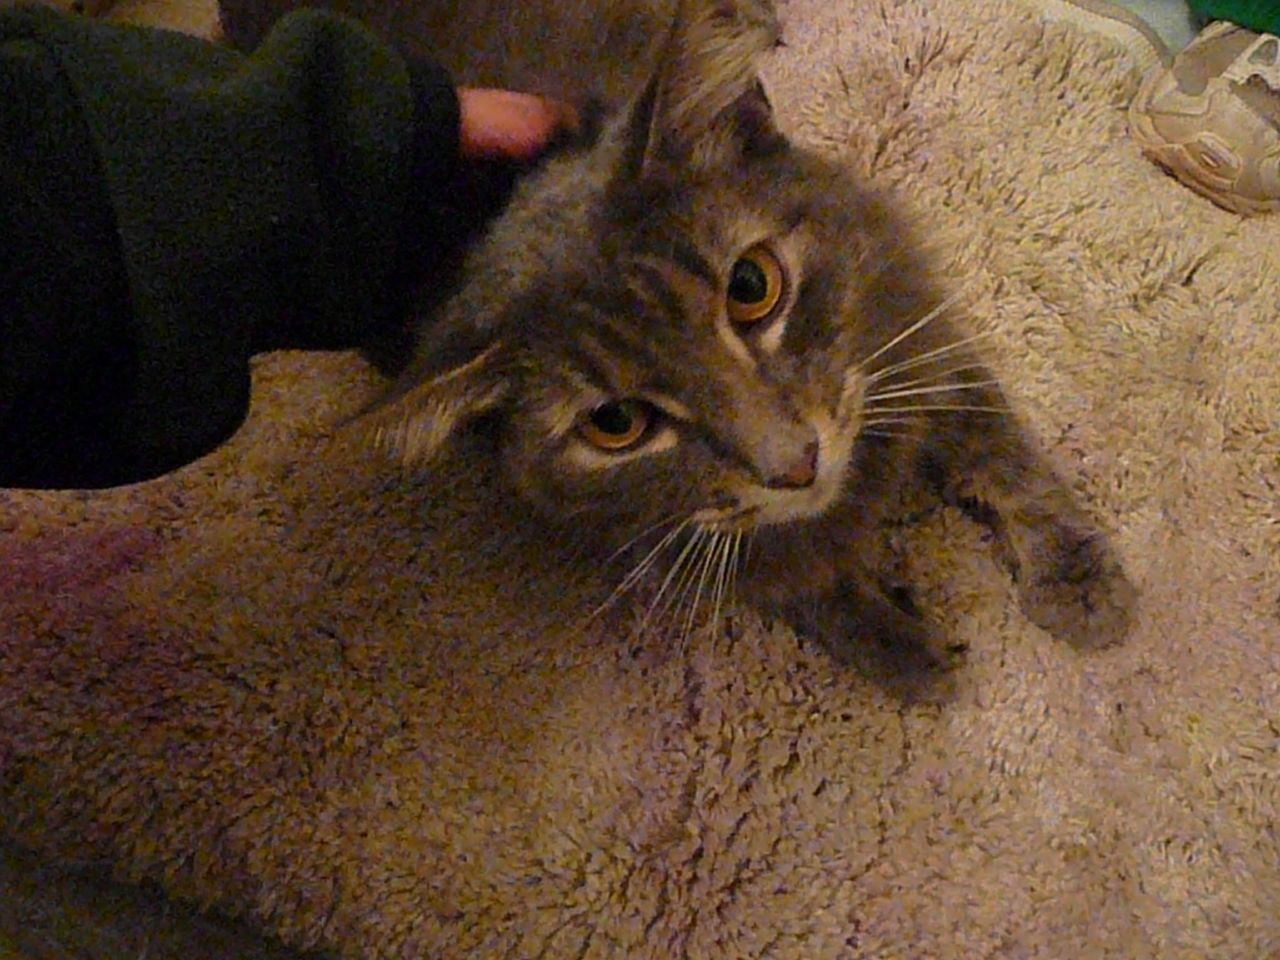 cat being pet by human and sitting on carpet